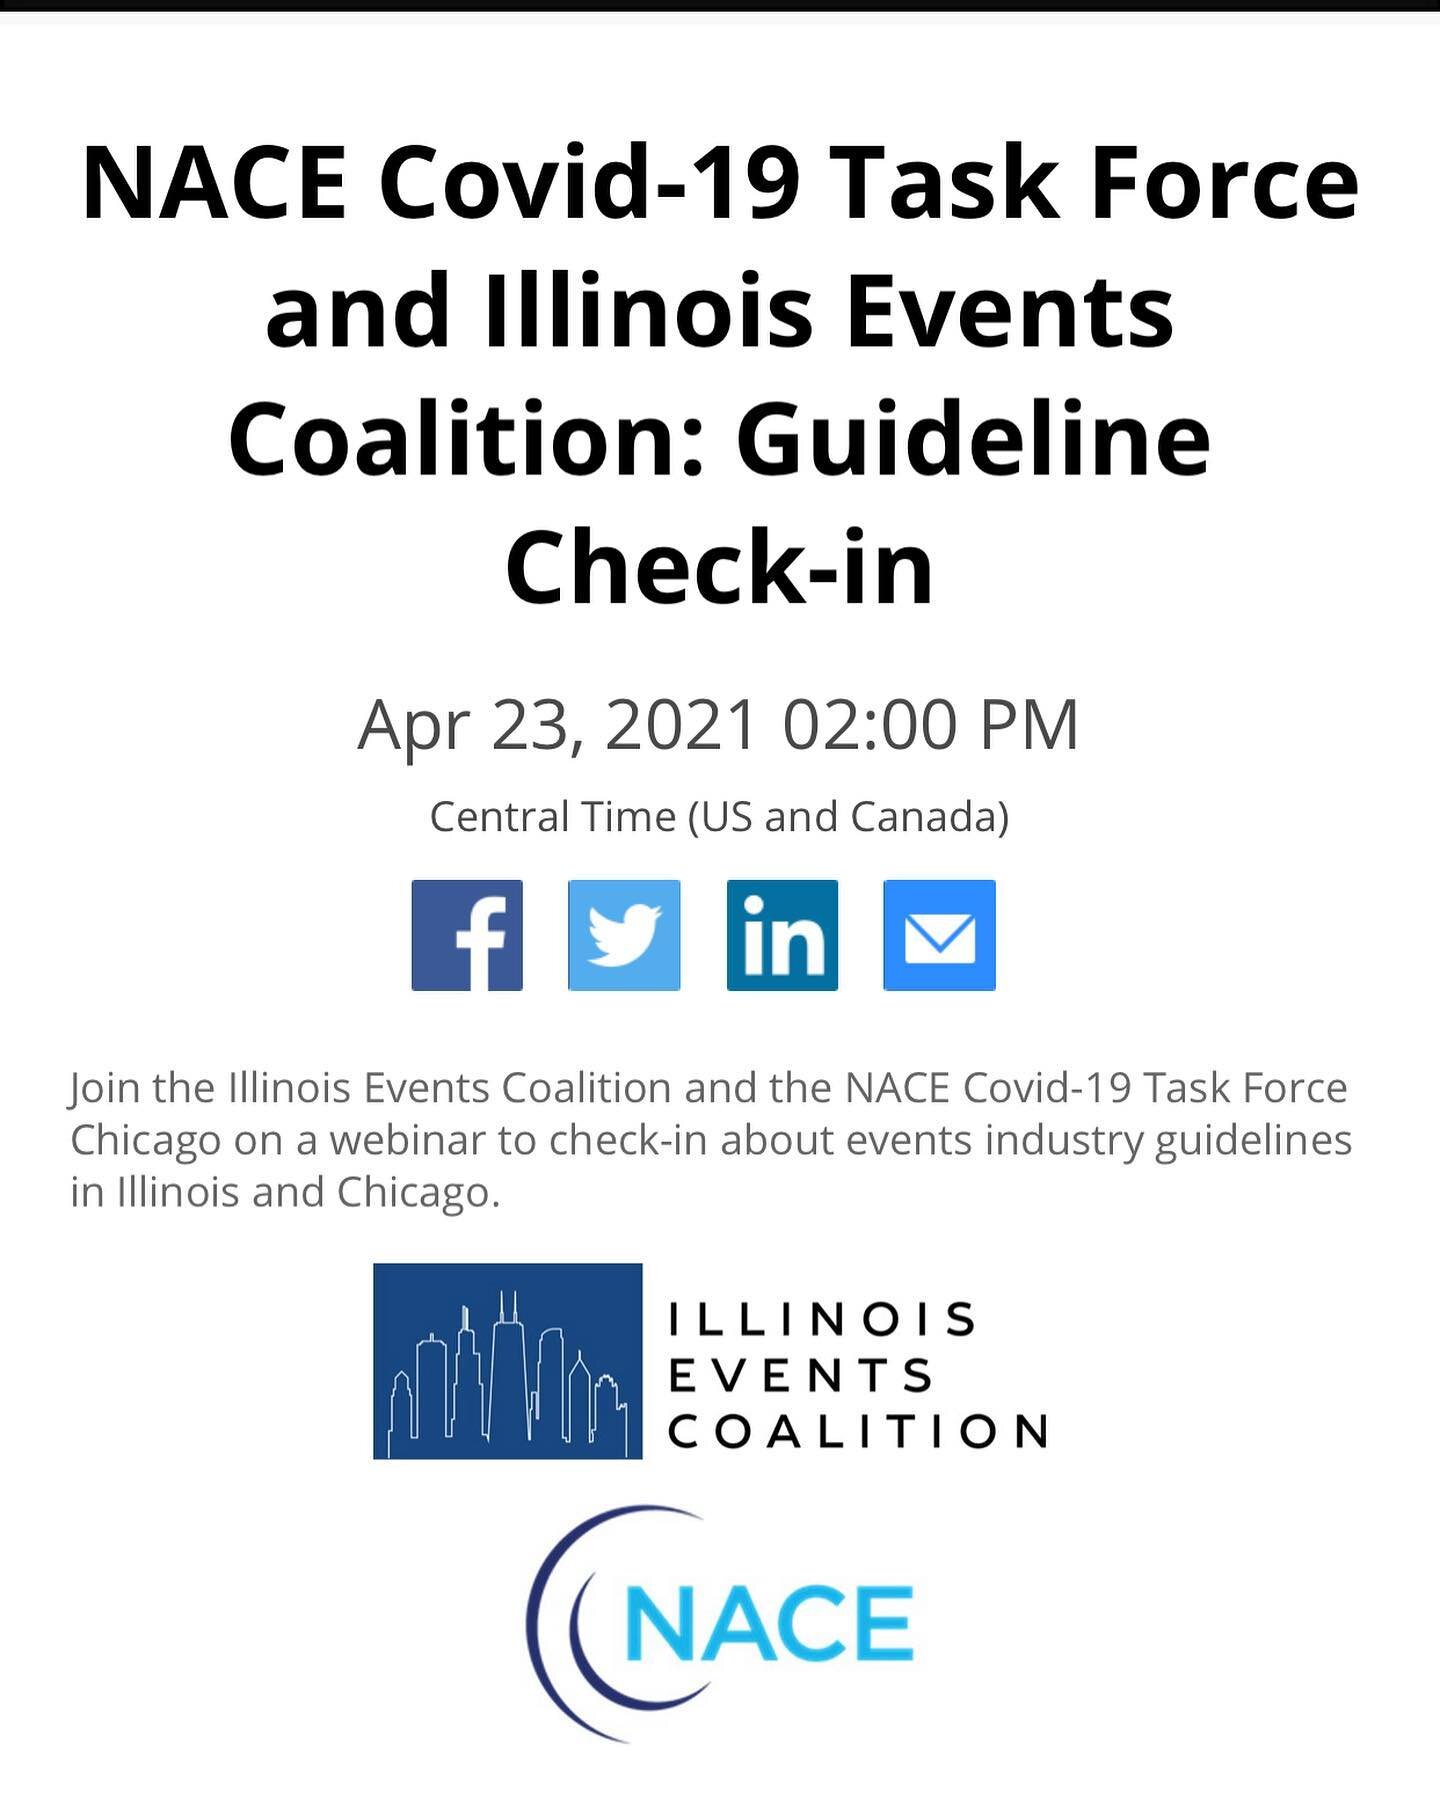 Join us today at 2:00 pm! 

It's been a while since the Illinois Events Coalition and the NACE Covid-19 Task Force (Chicago/IL) has checked in with the industry. 

We thought that it would be helpful to host a webinar this week to review the current 